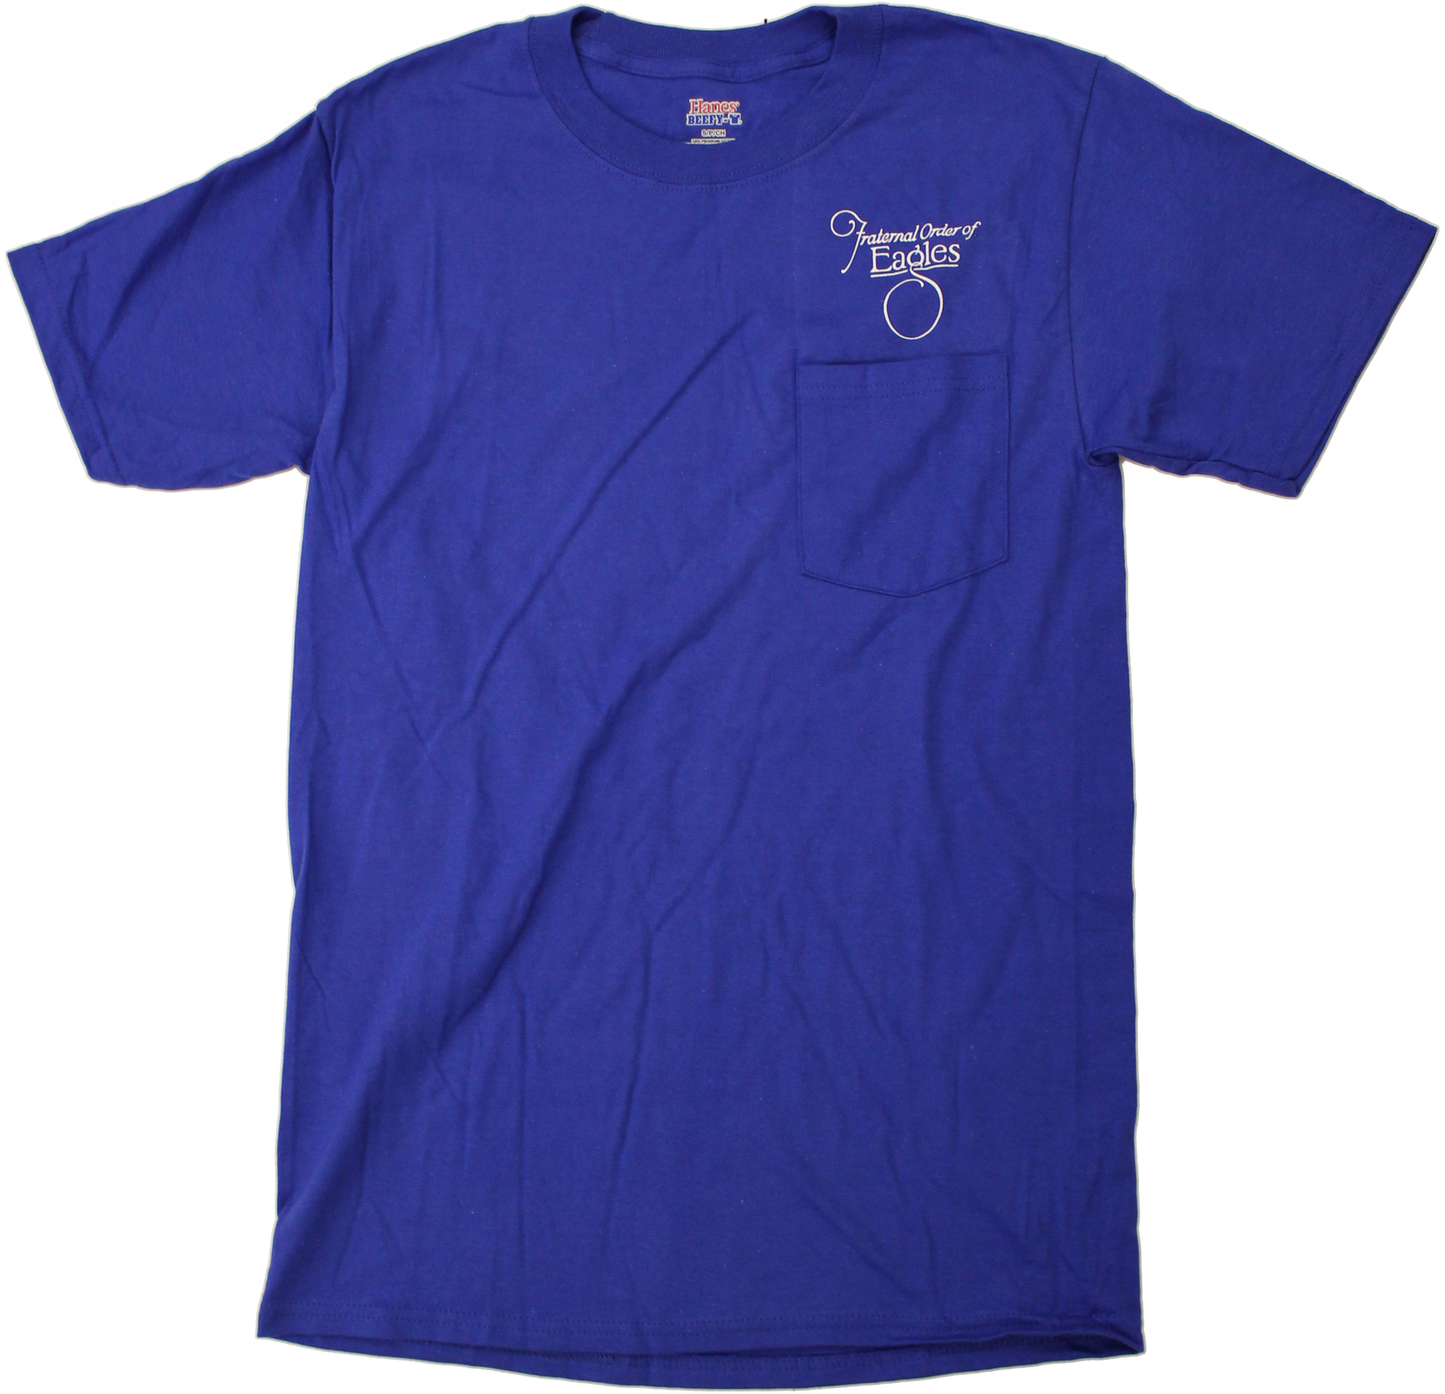 Eagle Riders Double Sided Beefy Pocket T-Shirt